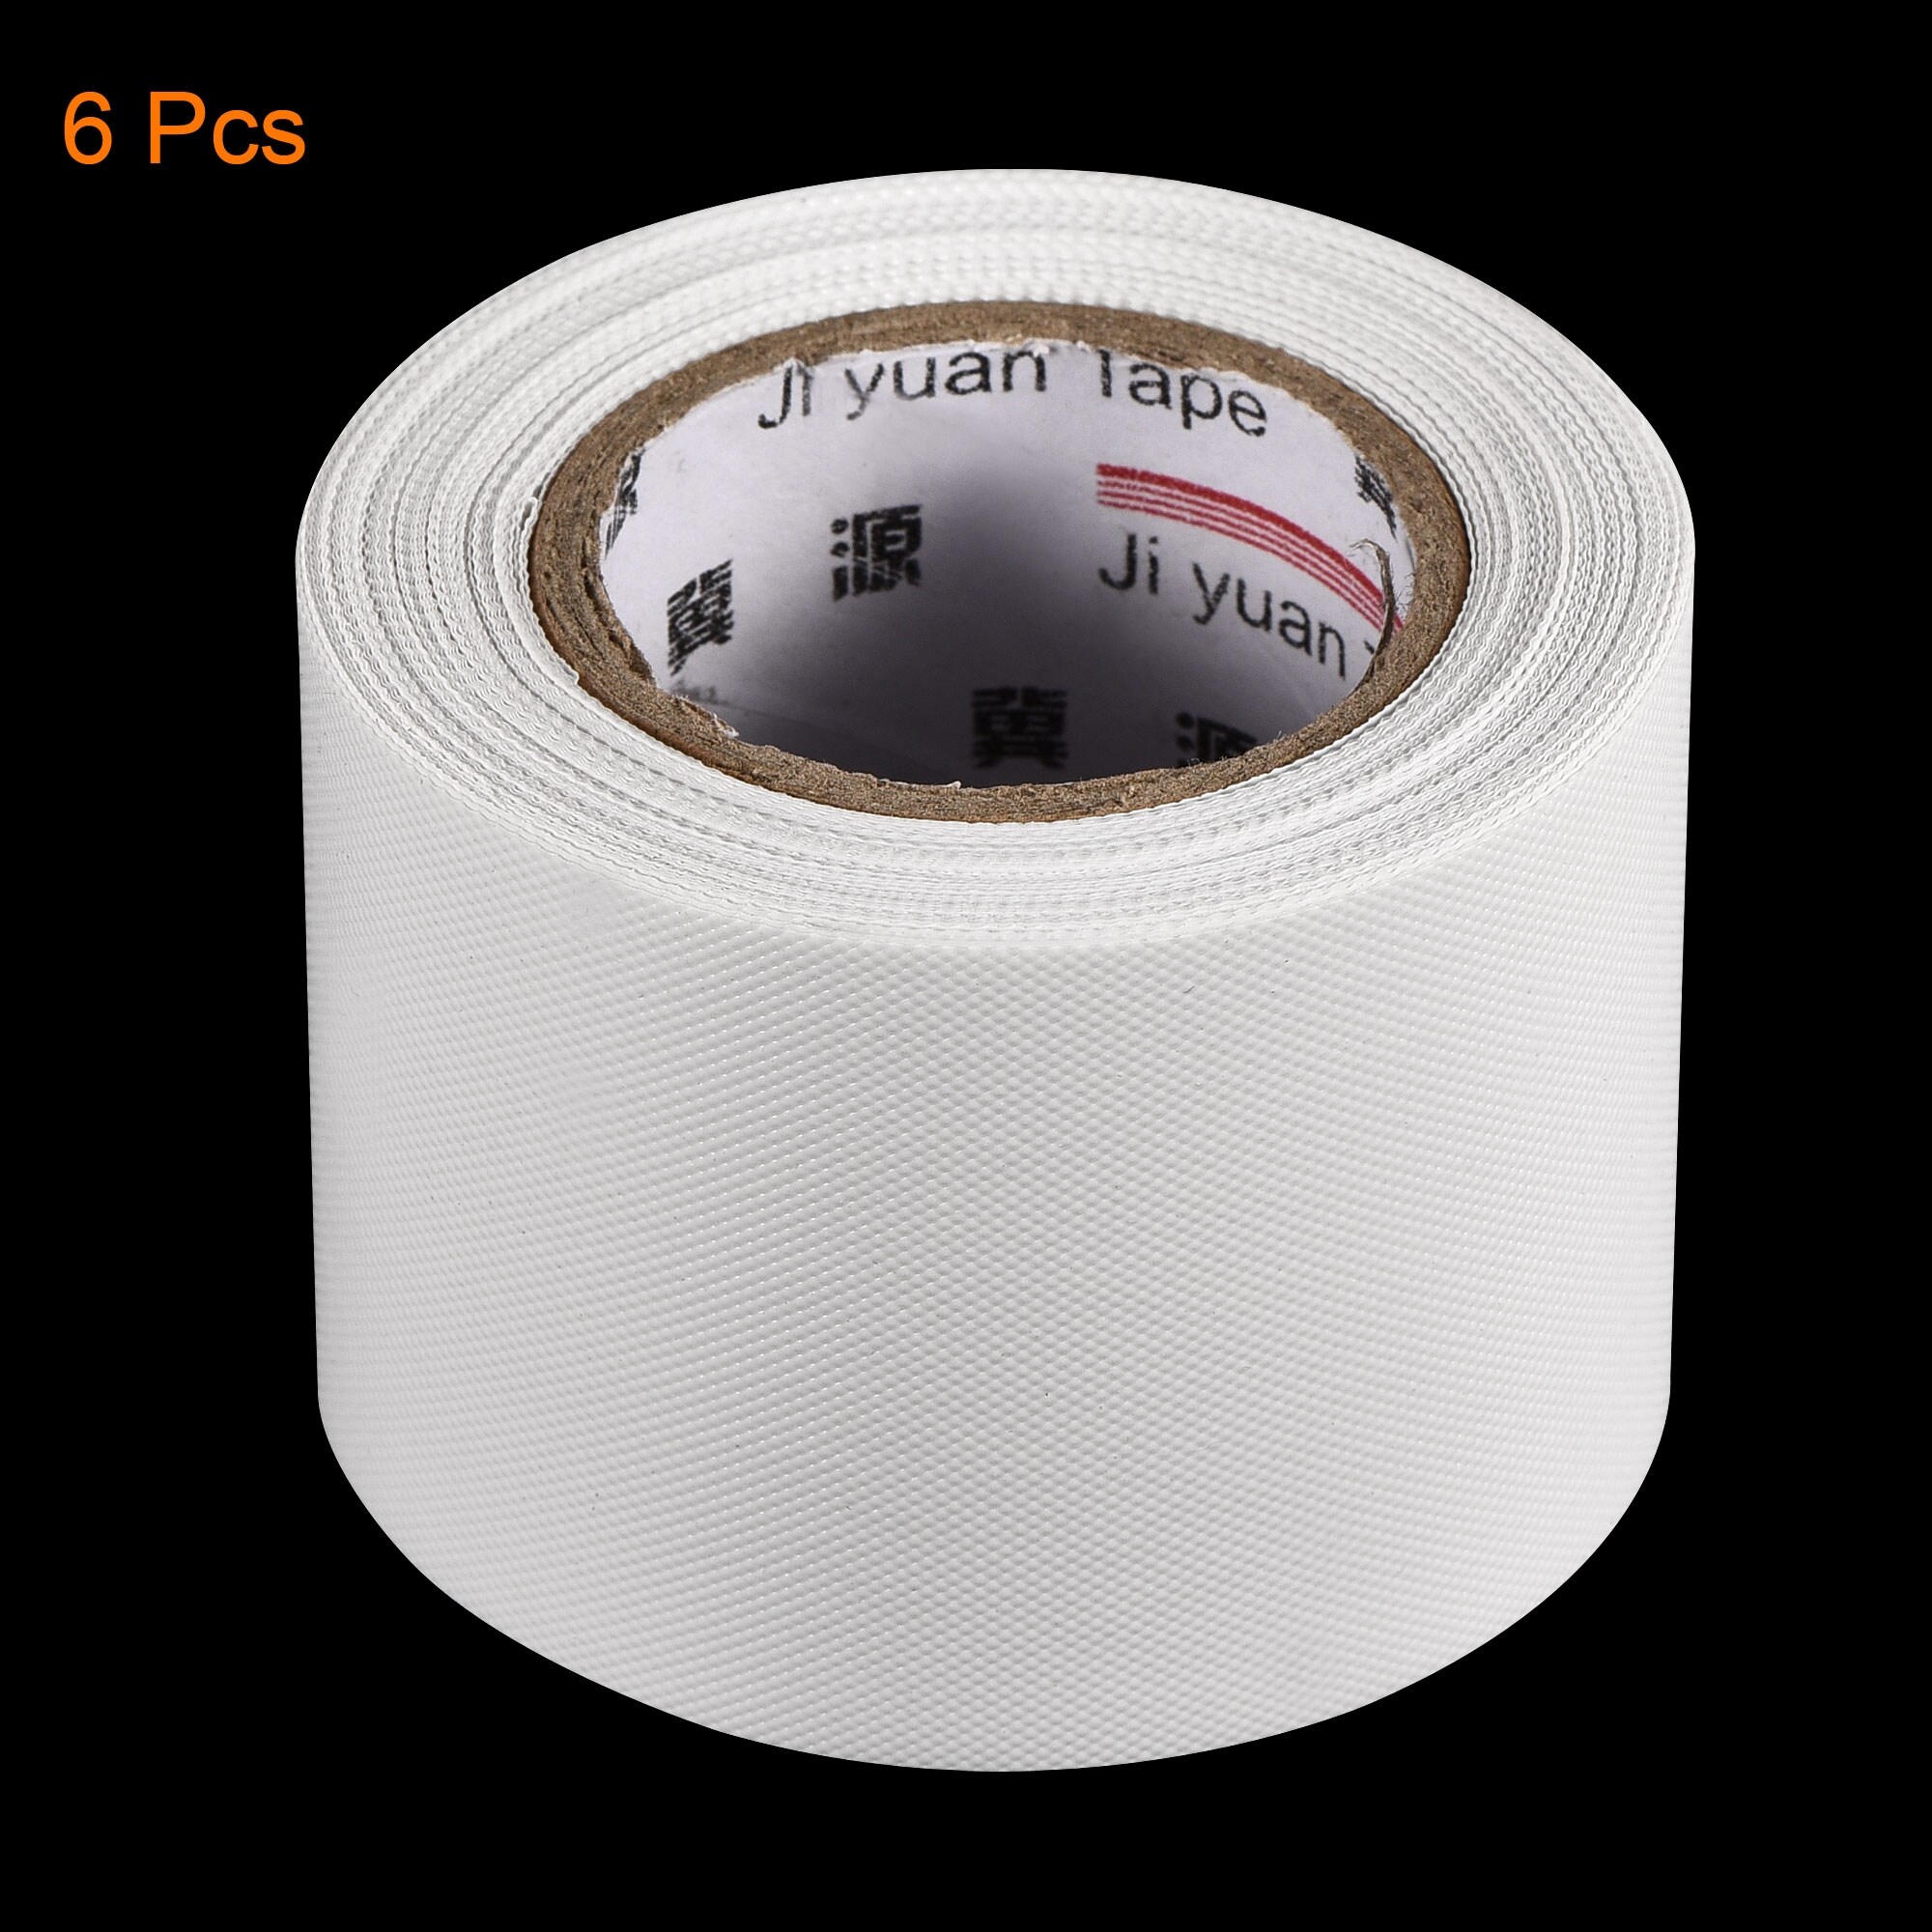 PVC Pipe Wrapping Tapes - Unipackuae